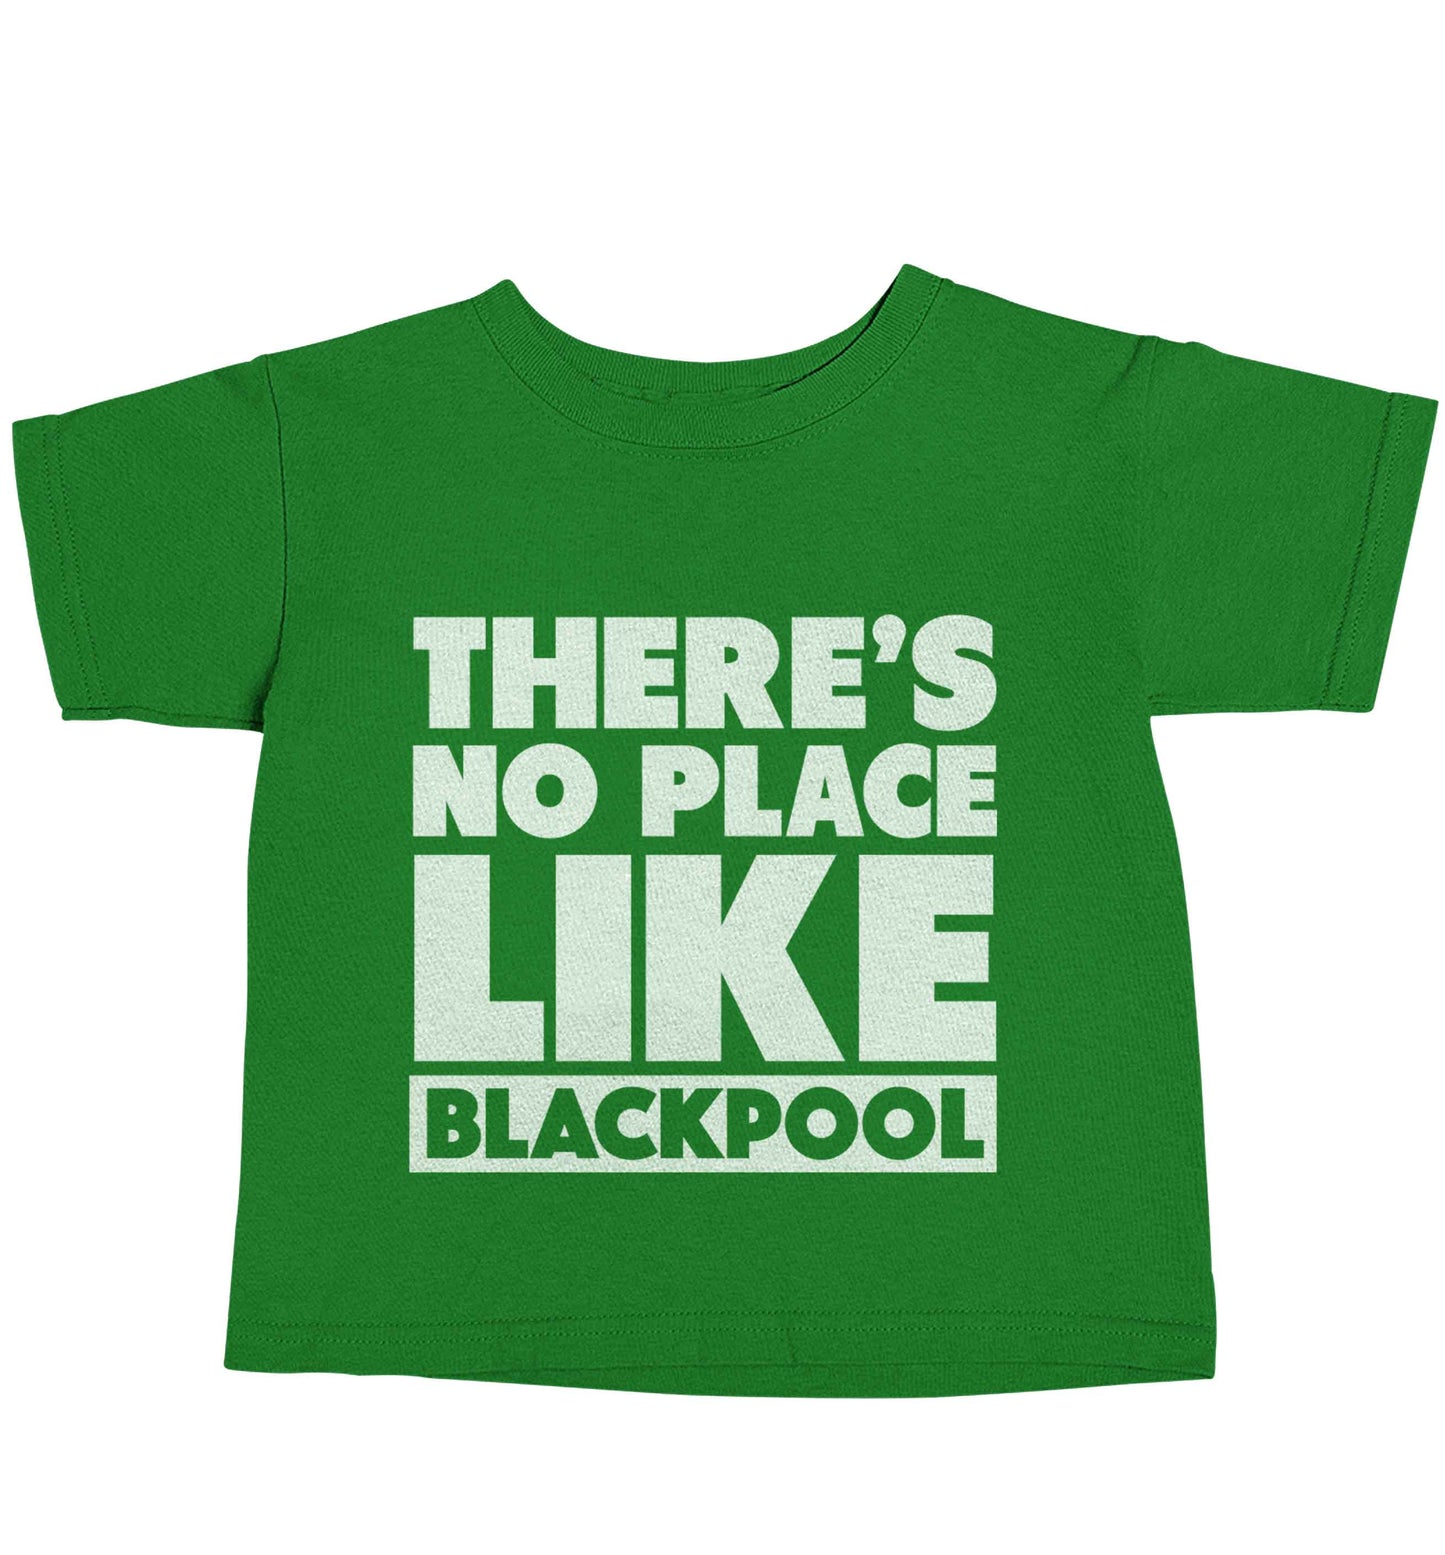 There's no place like Blackpool green baby toddler Tshirt 2 Years